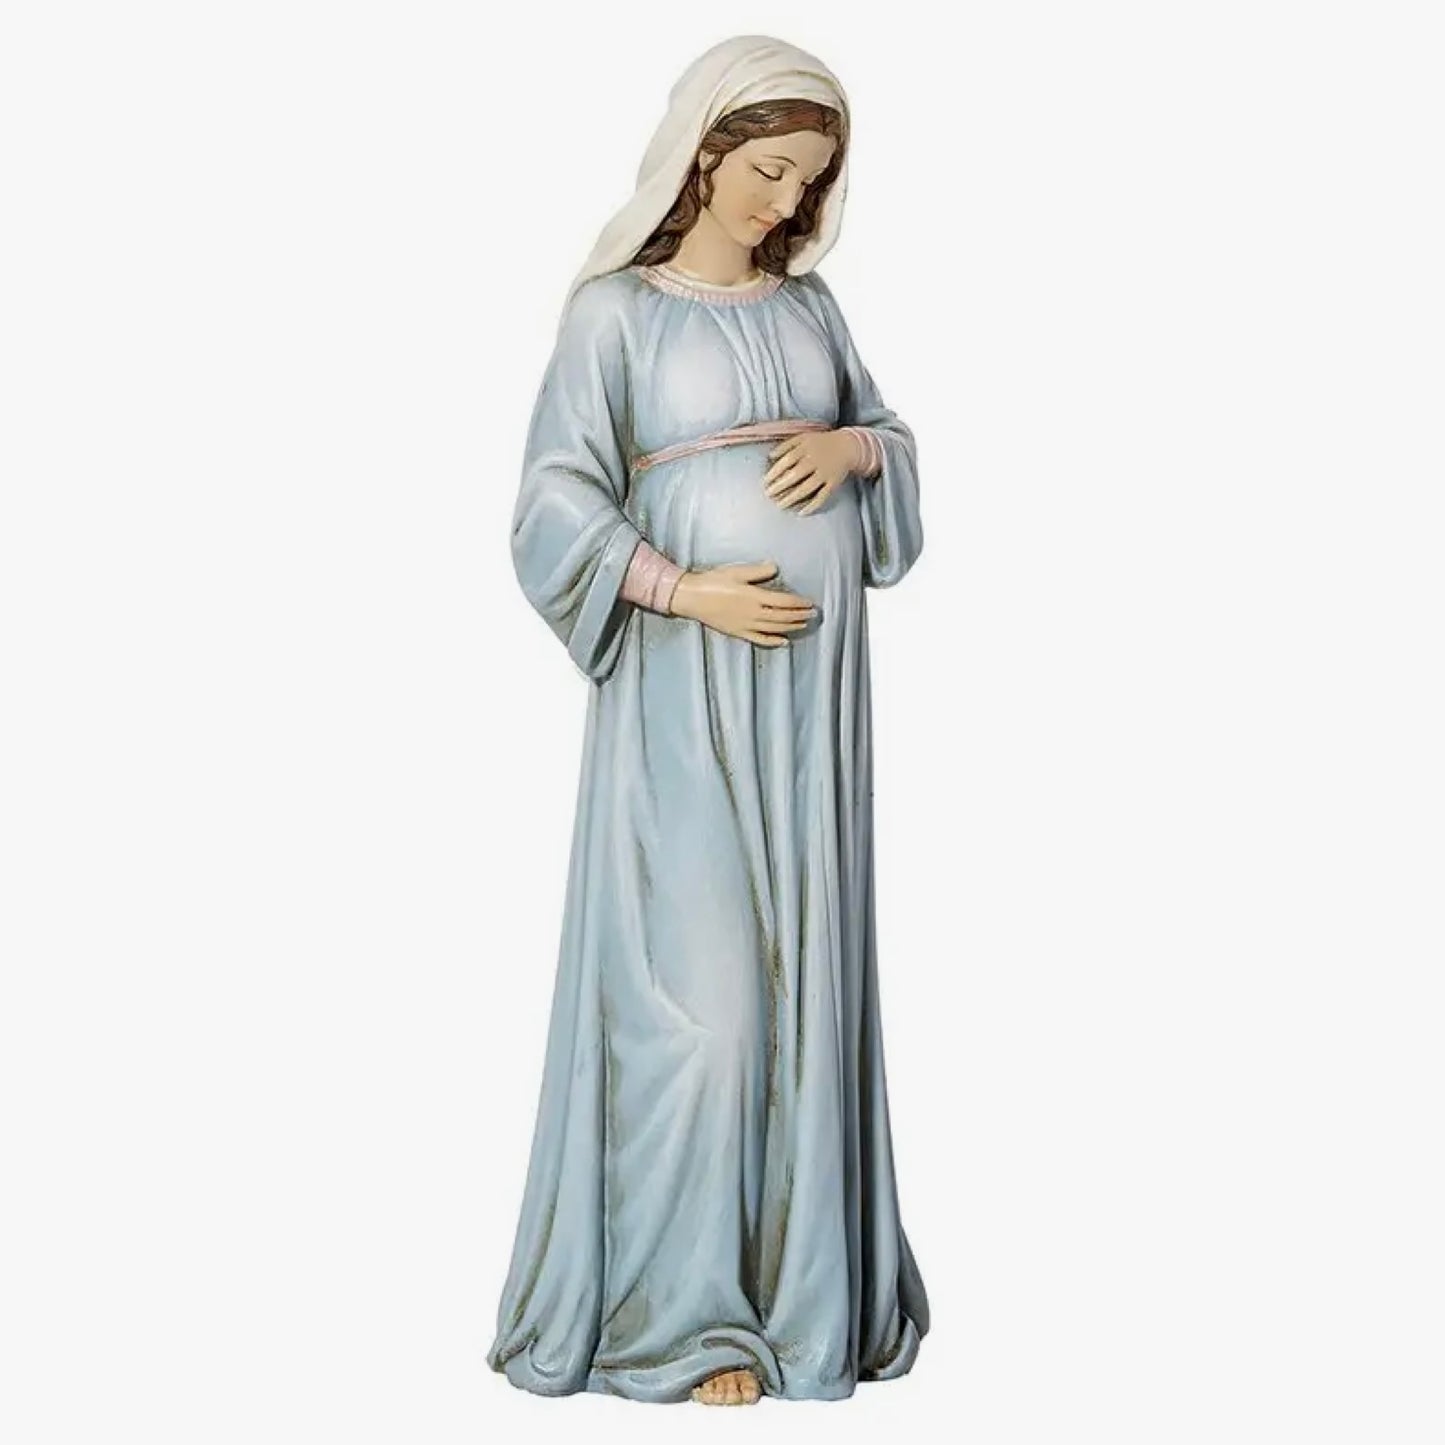 Our-Mary-Mother-of-God-Pregnant-Catholic-Statue-Figurines-by-Toscana